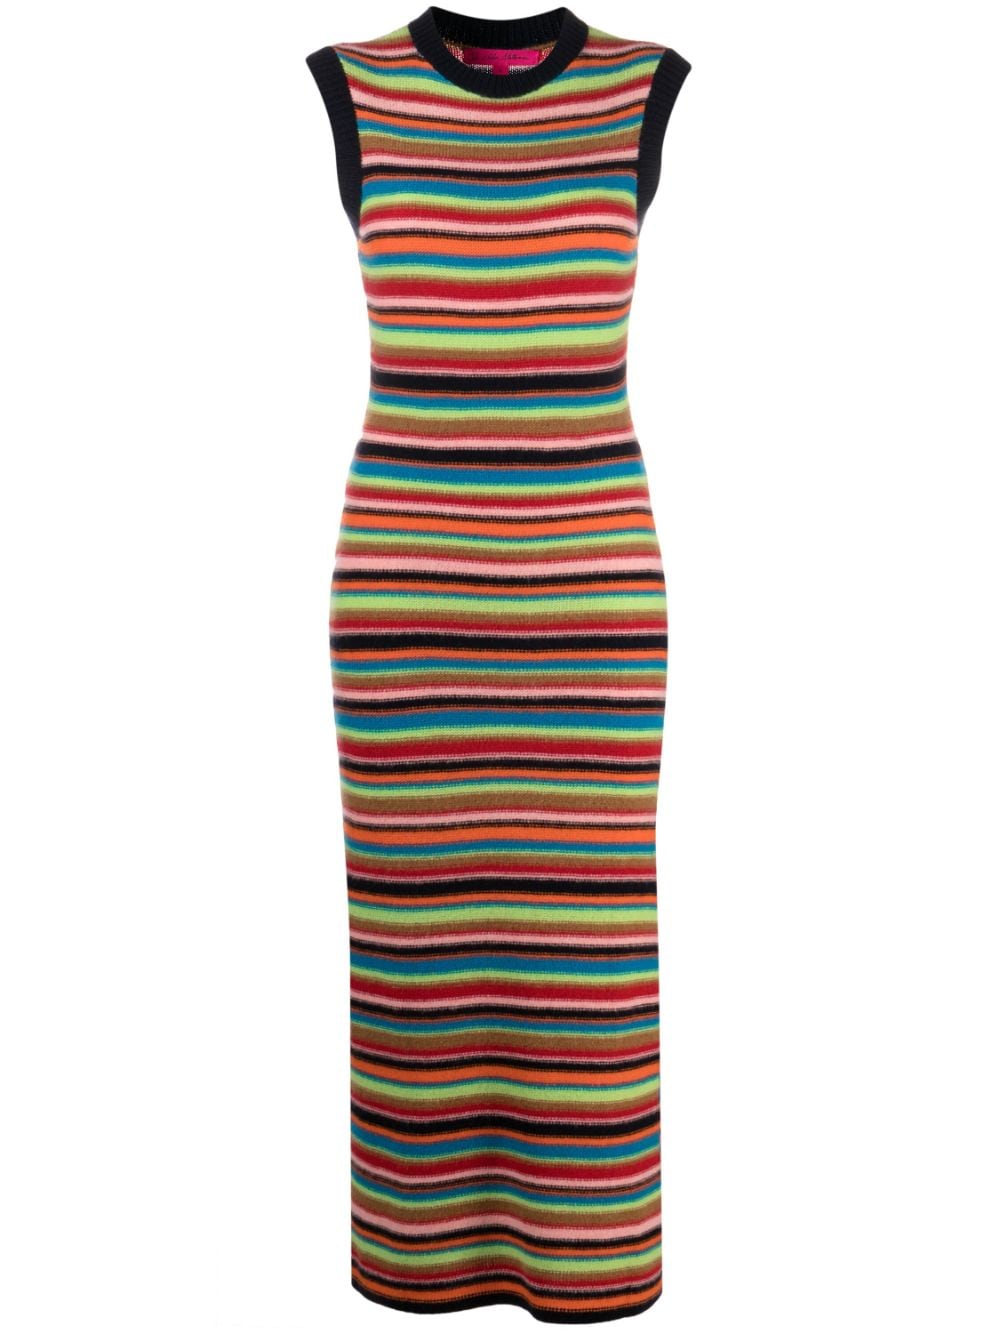 THE ELDER STATESMAN STRIPED CASHMERE KNITTED DRESS